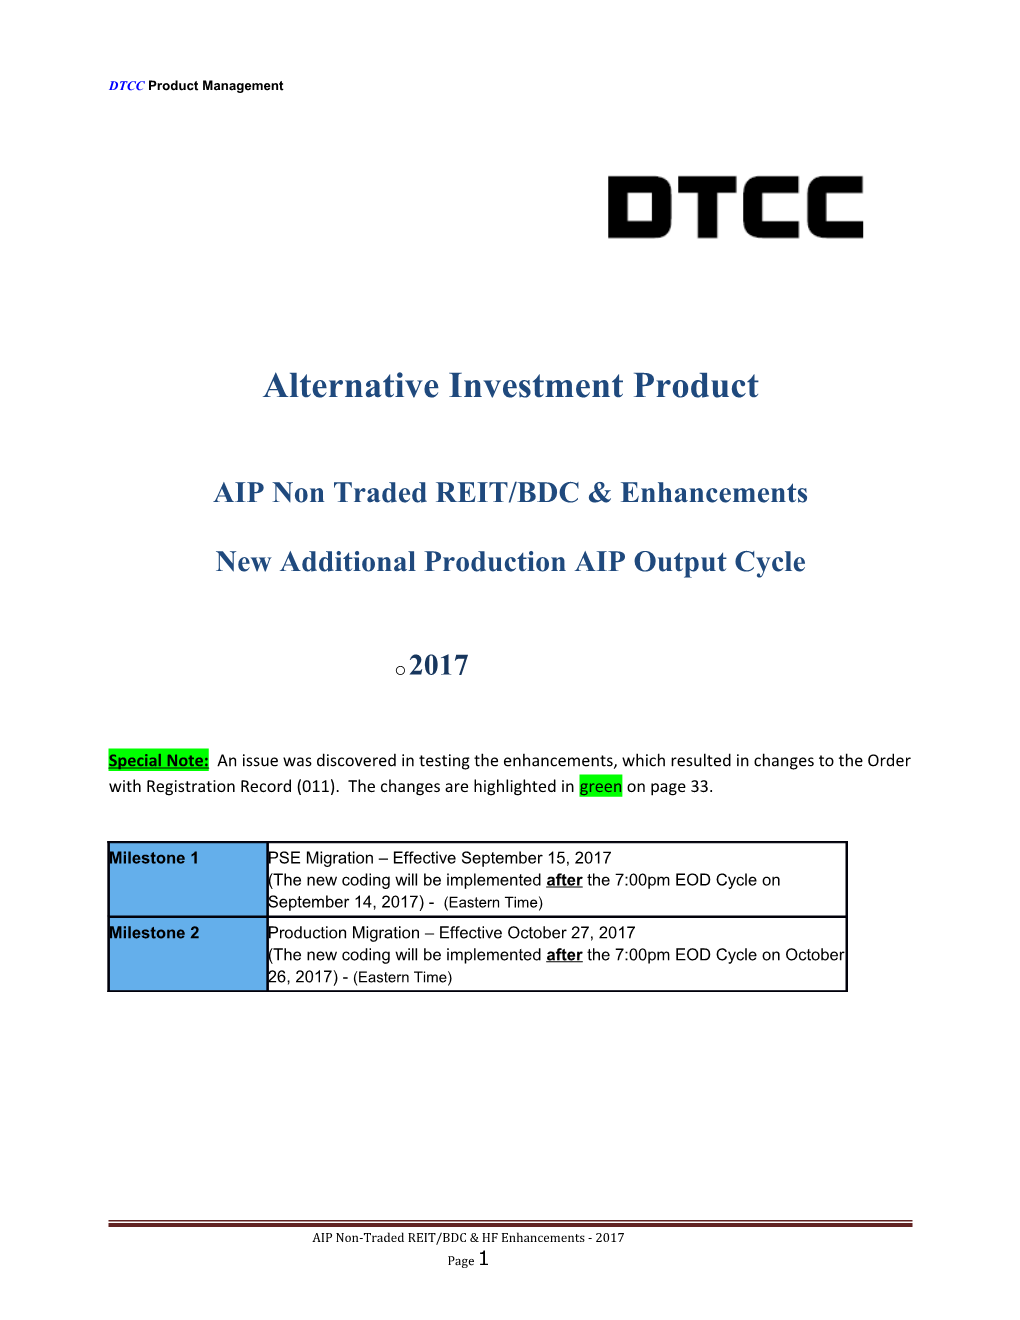 AIP Non Traded REIT/Bdcenhancements